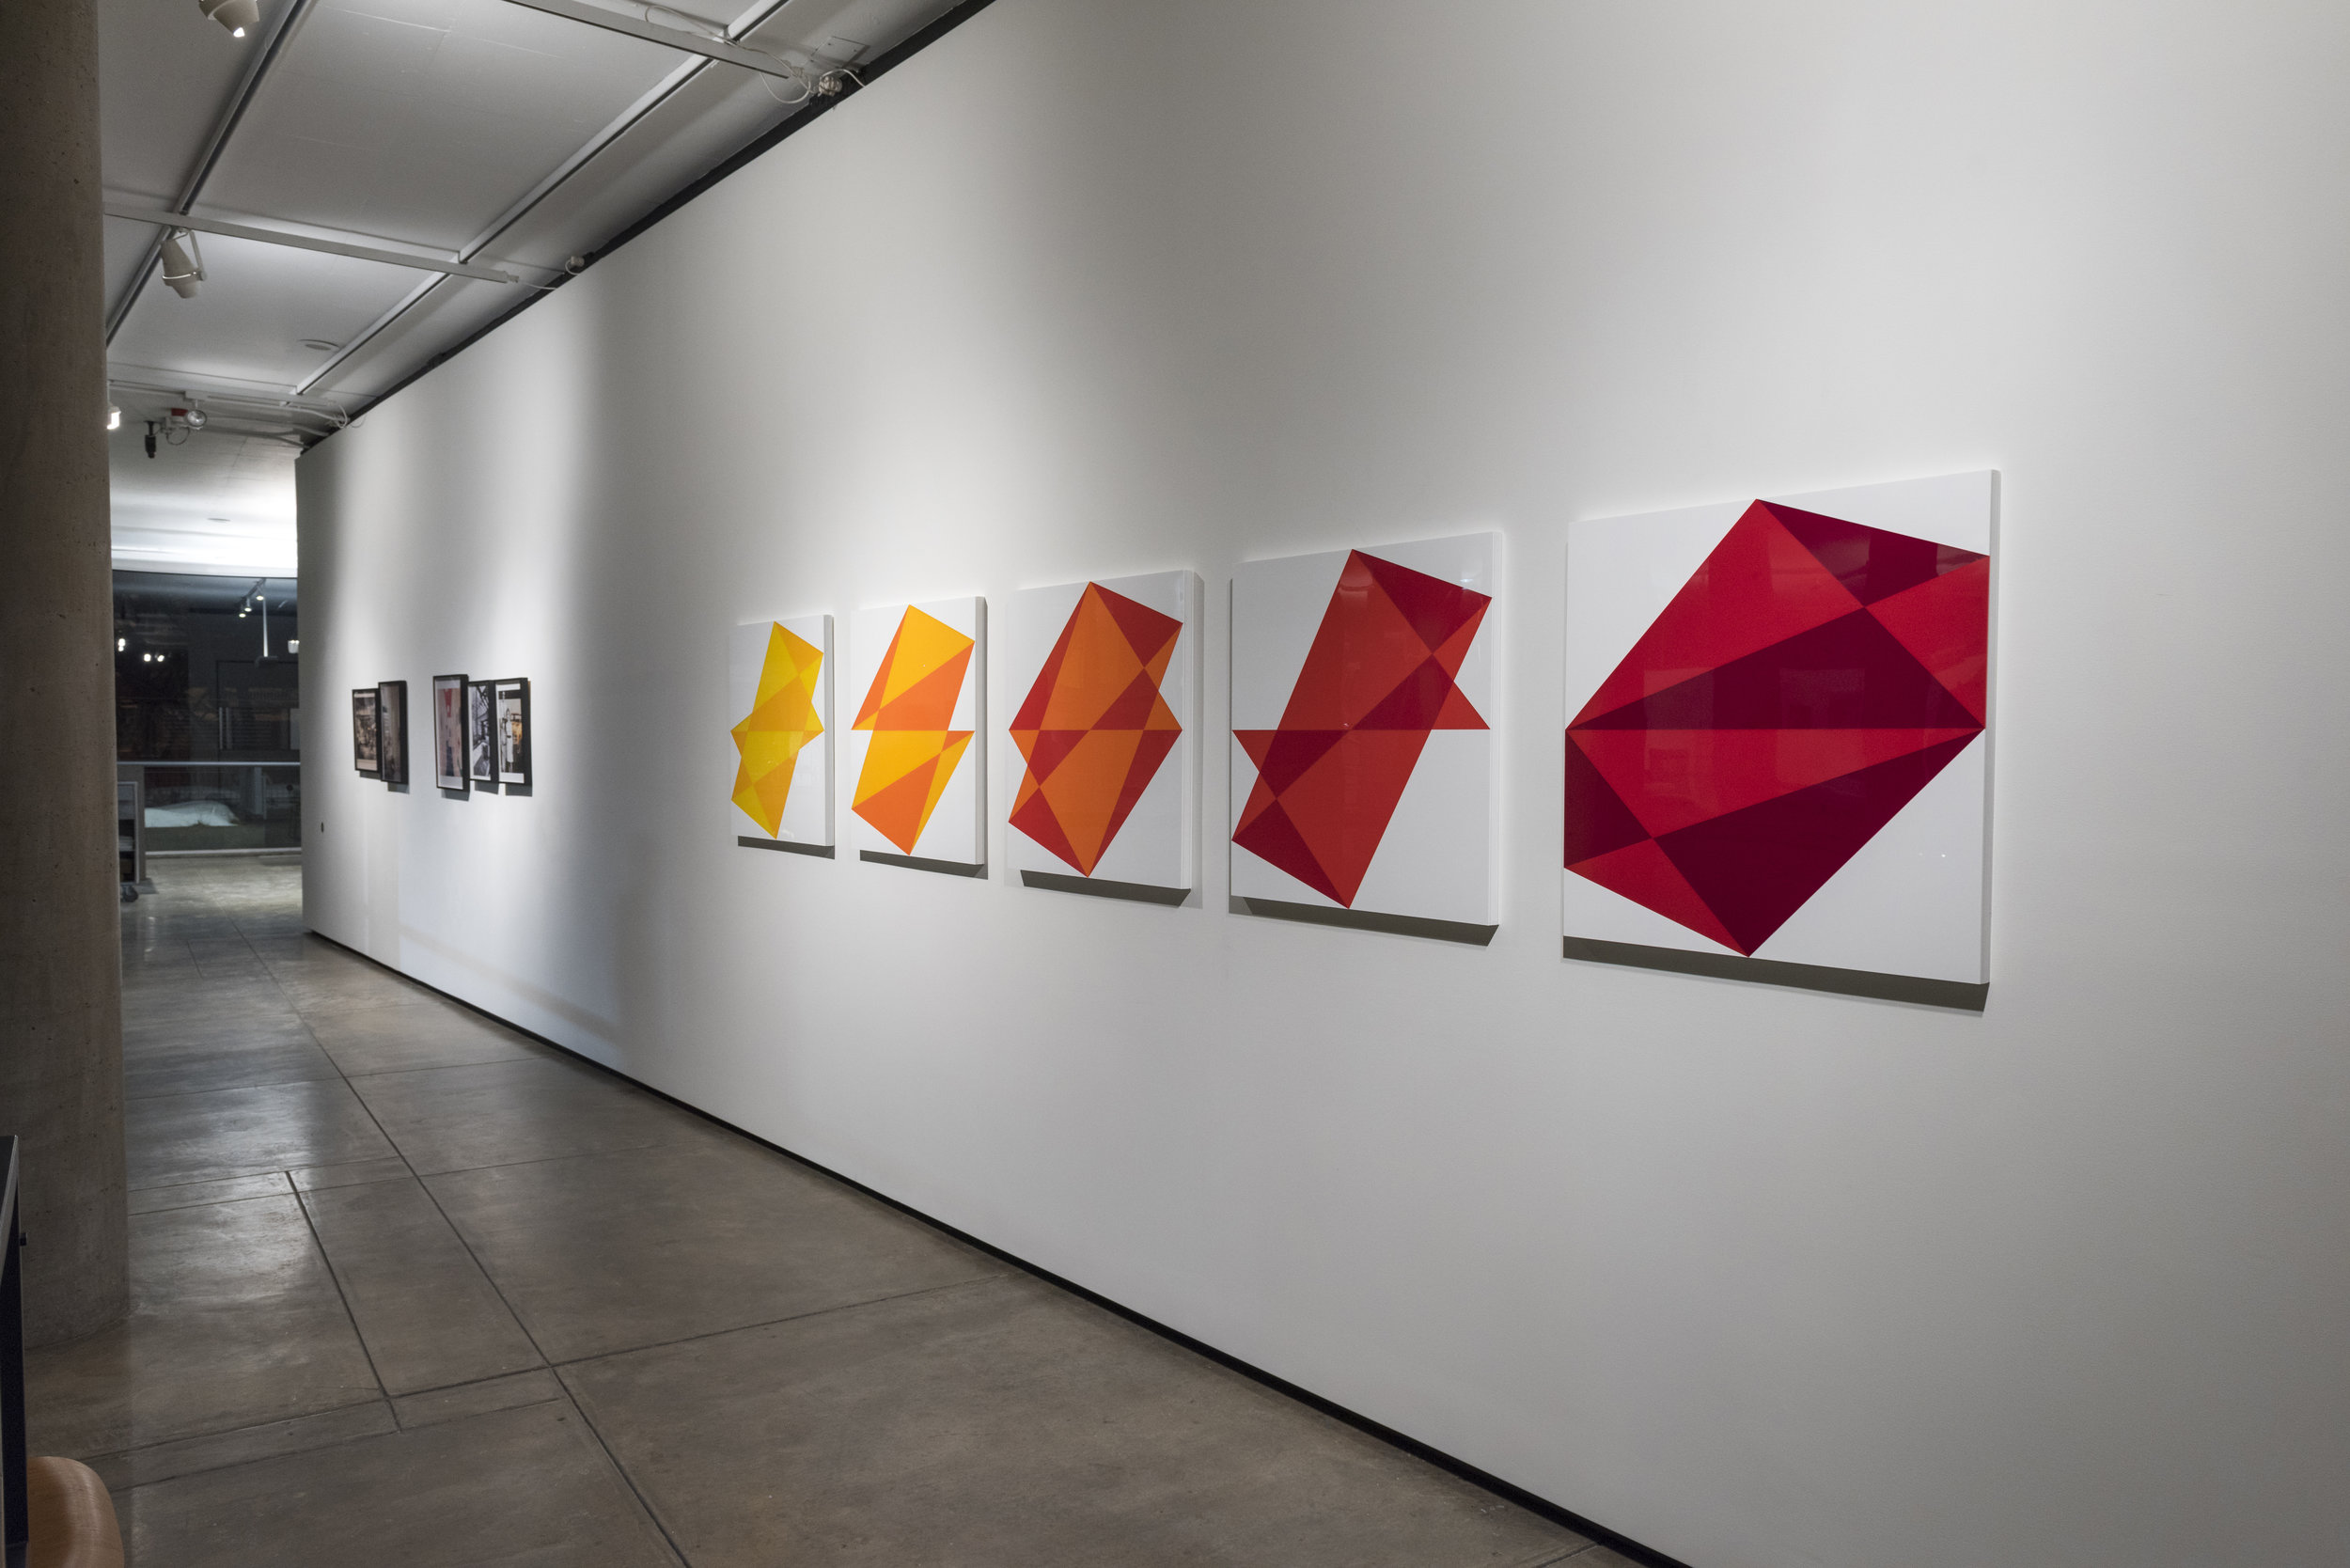  Brian Zink, the&nbsp; Composition  series, 2013, each colored Plexiglas mounted on board, 30 × 30 inches. Courtesy Fidelity Investments Corporate Art Collection. Martha Rosler,&nbsp;photomontages from the series  House Beautiful: Bringing the War Ho